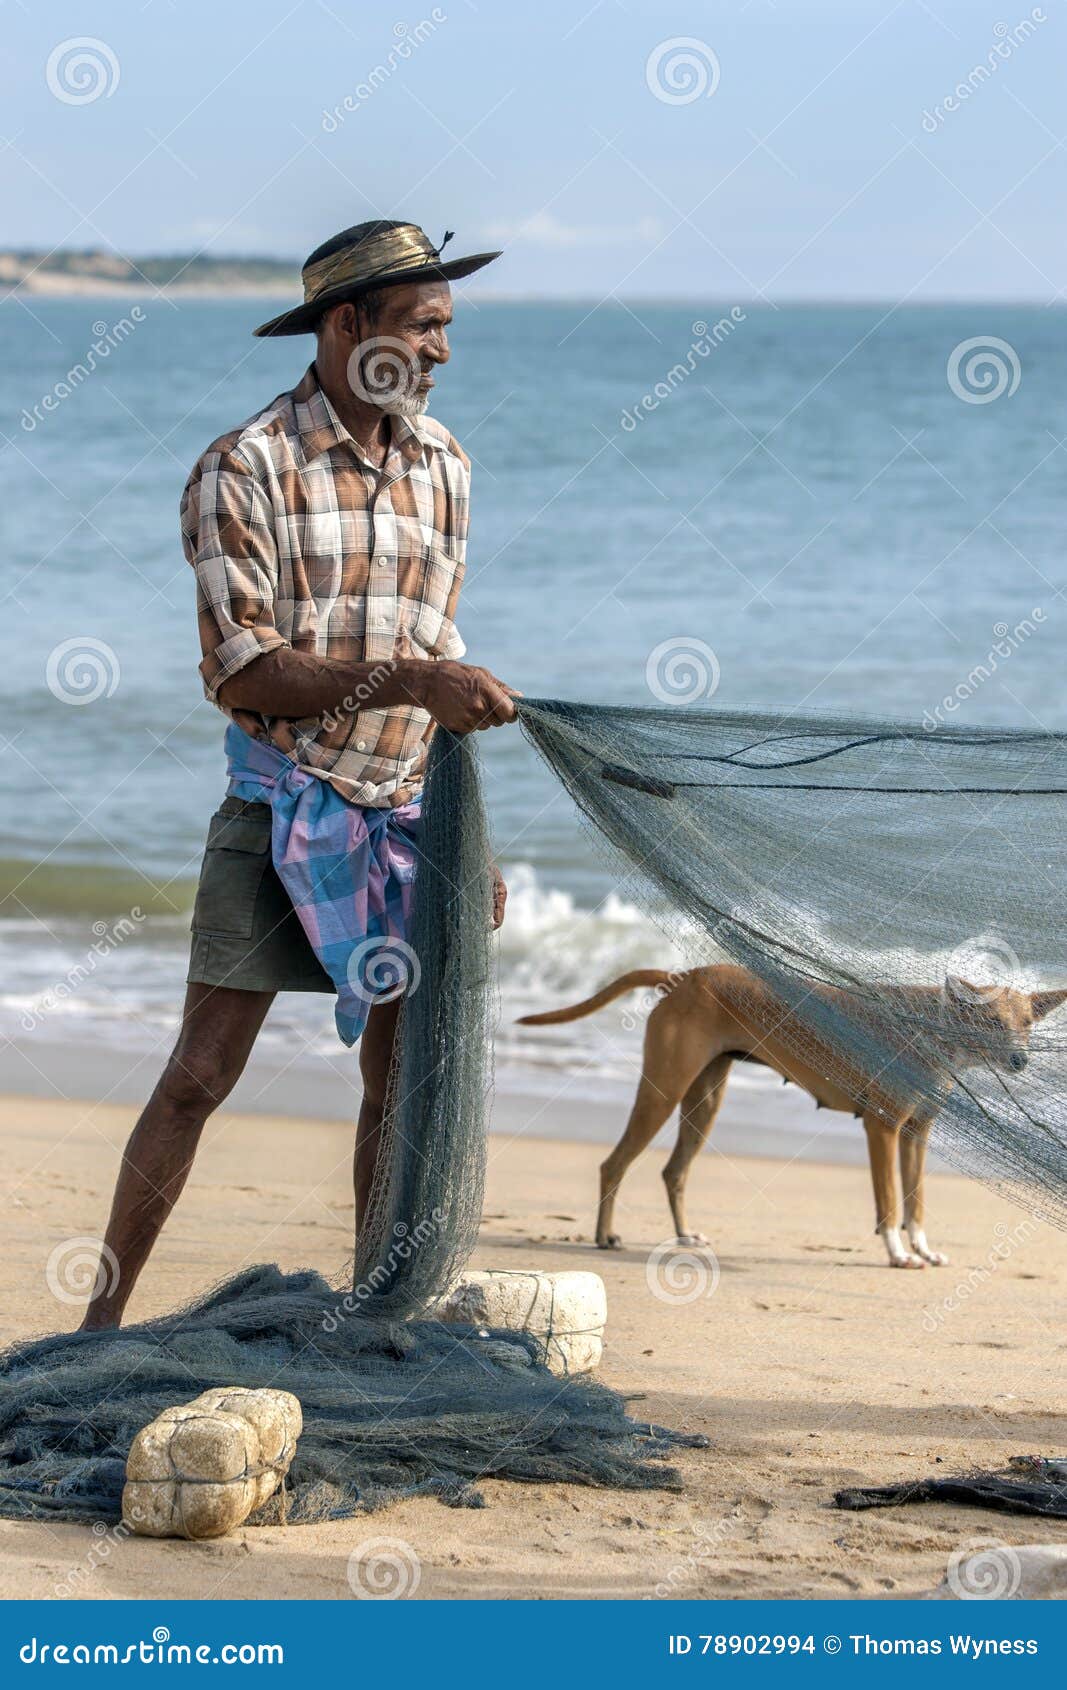 A Fisherman Sorting a Fishing Net on Arugam Bay Beach in the Early